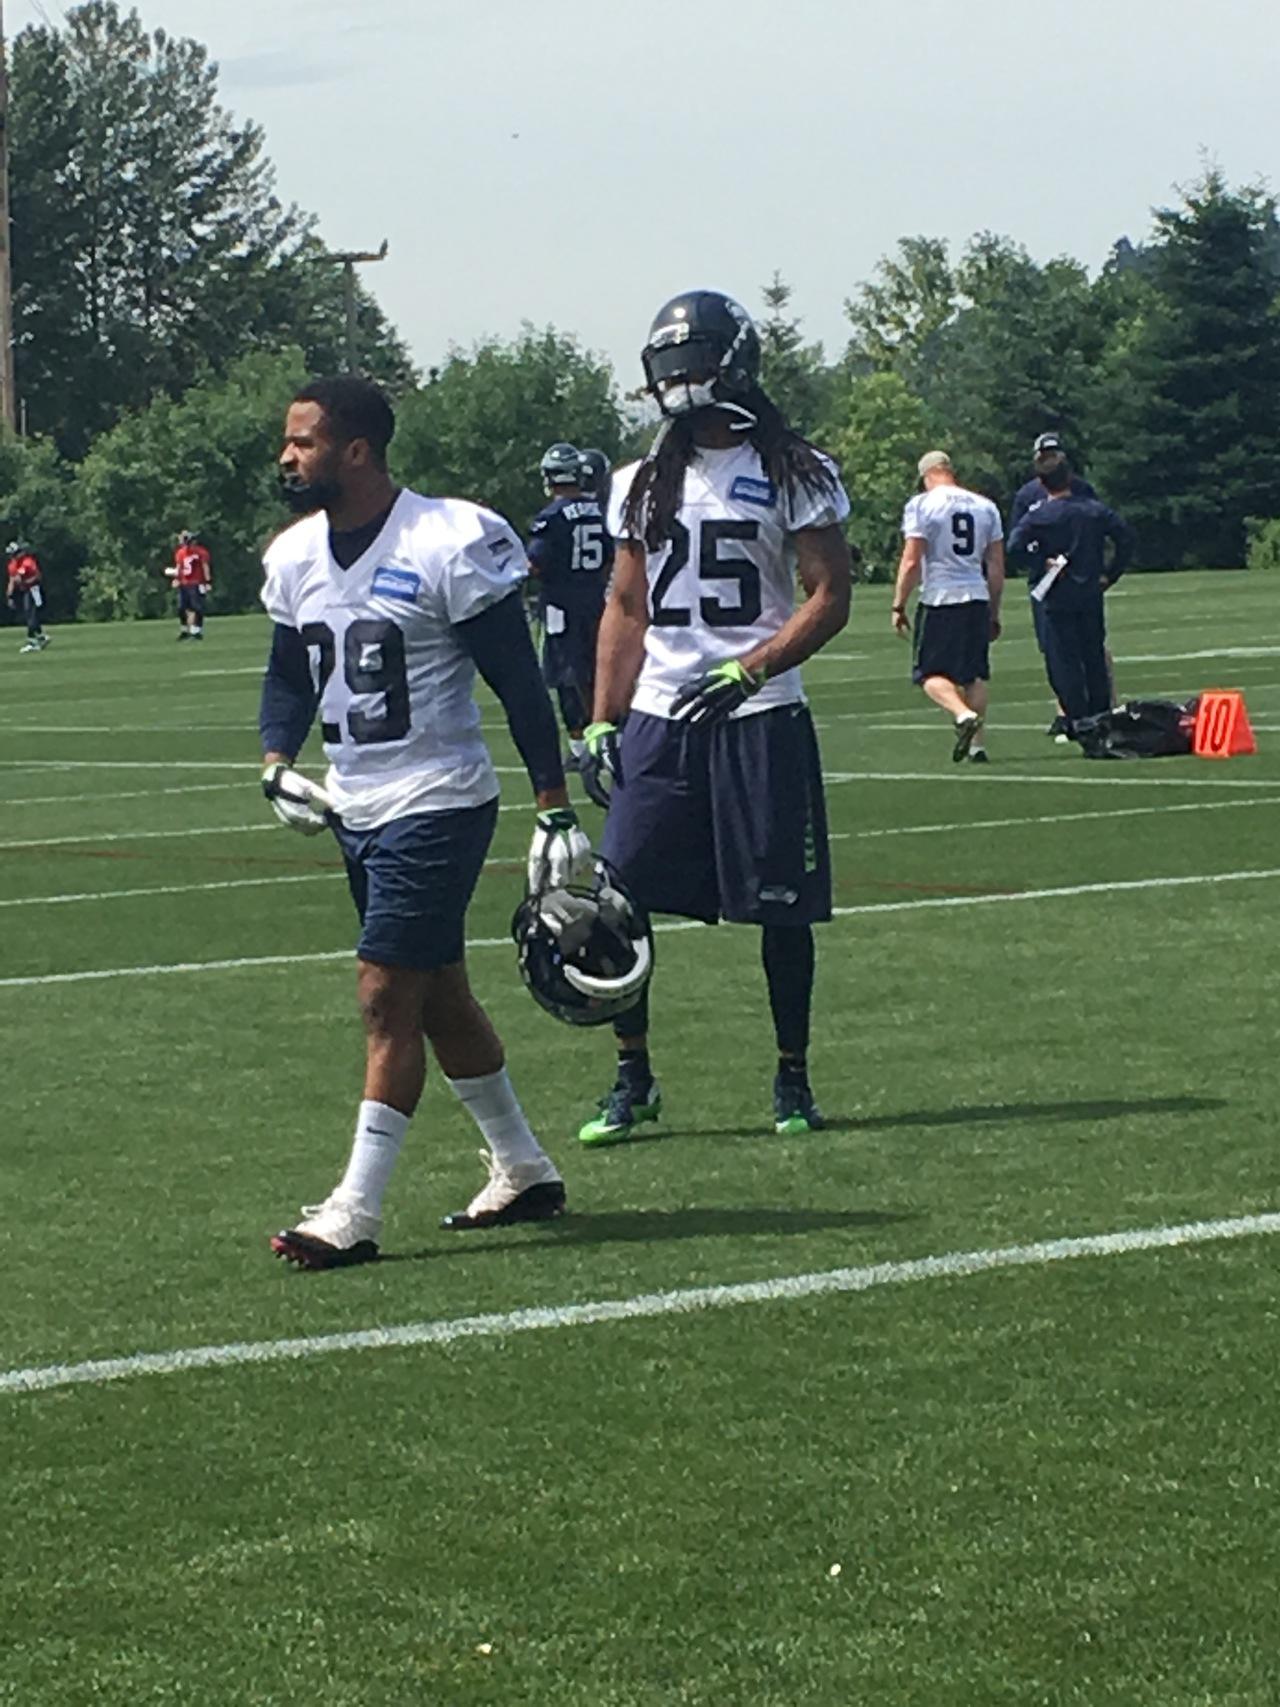 Seahawks secondary stars Earl Thomas and Richard Sherman are fully able to participate in OTAs this year.